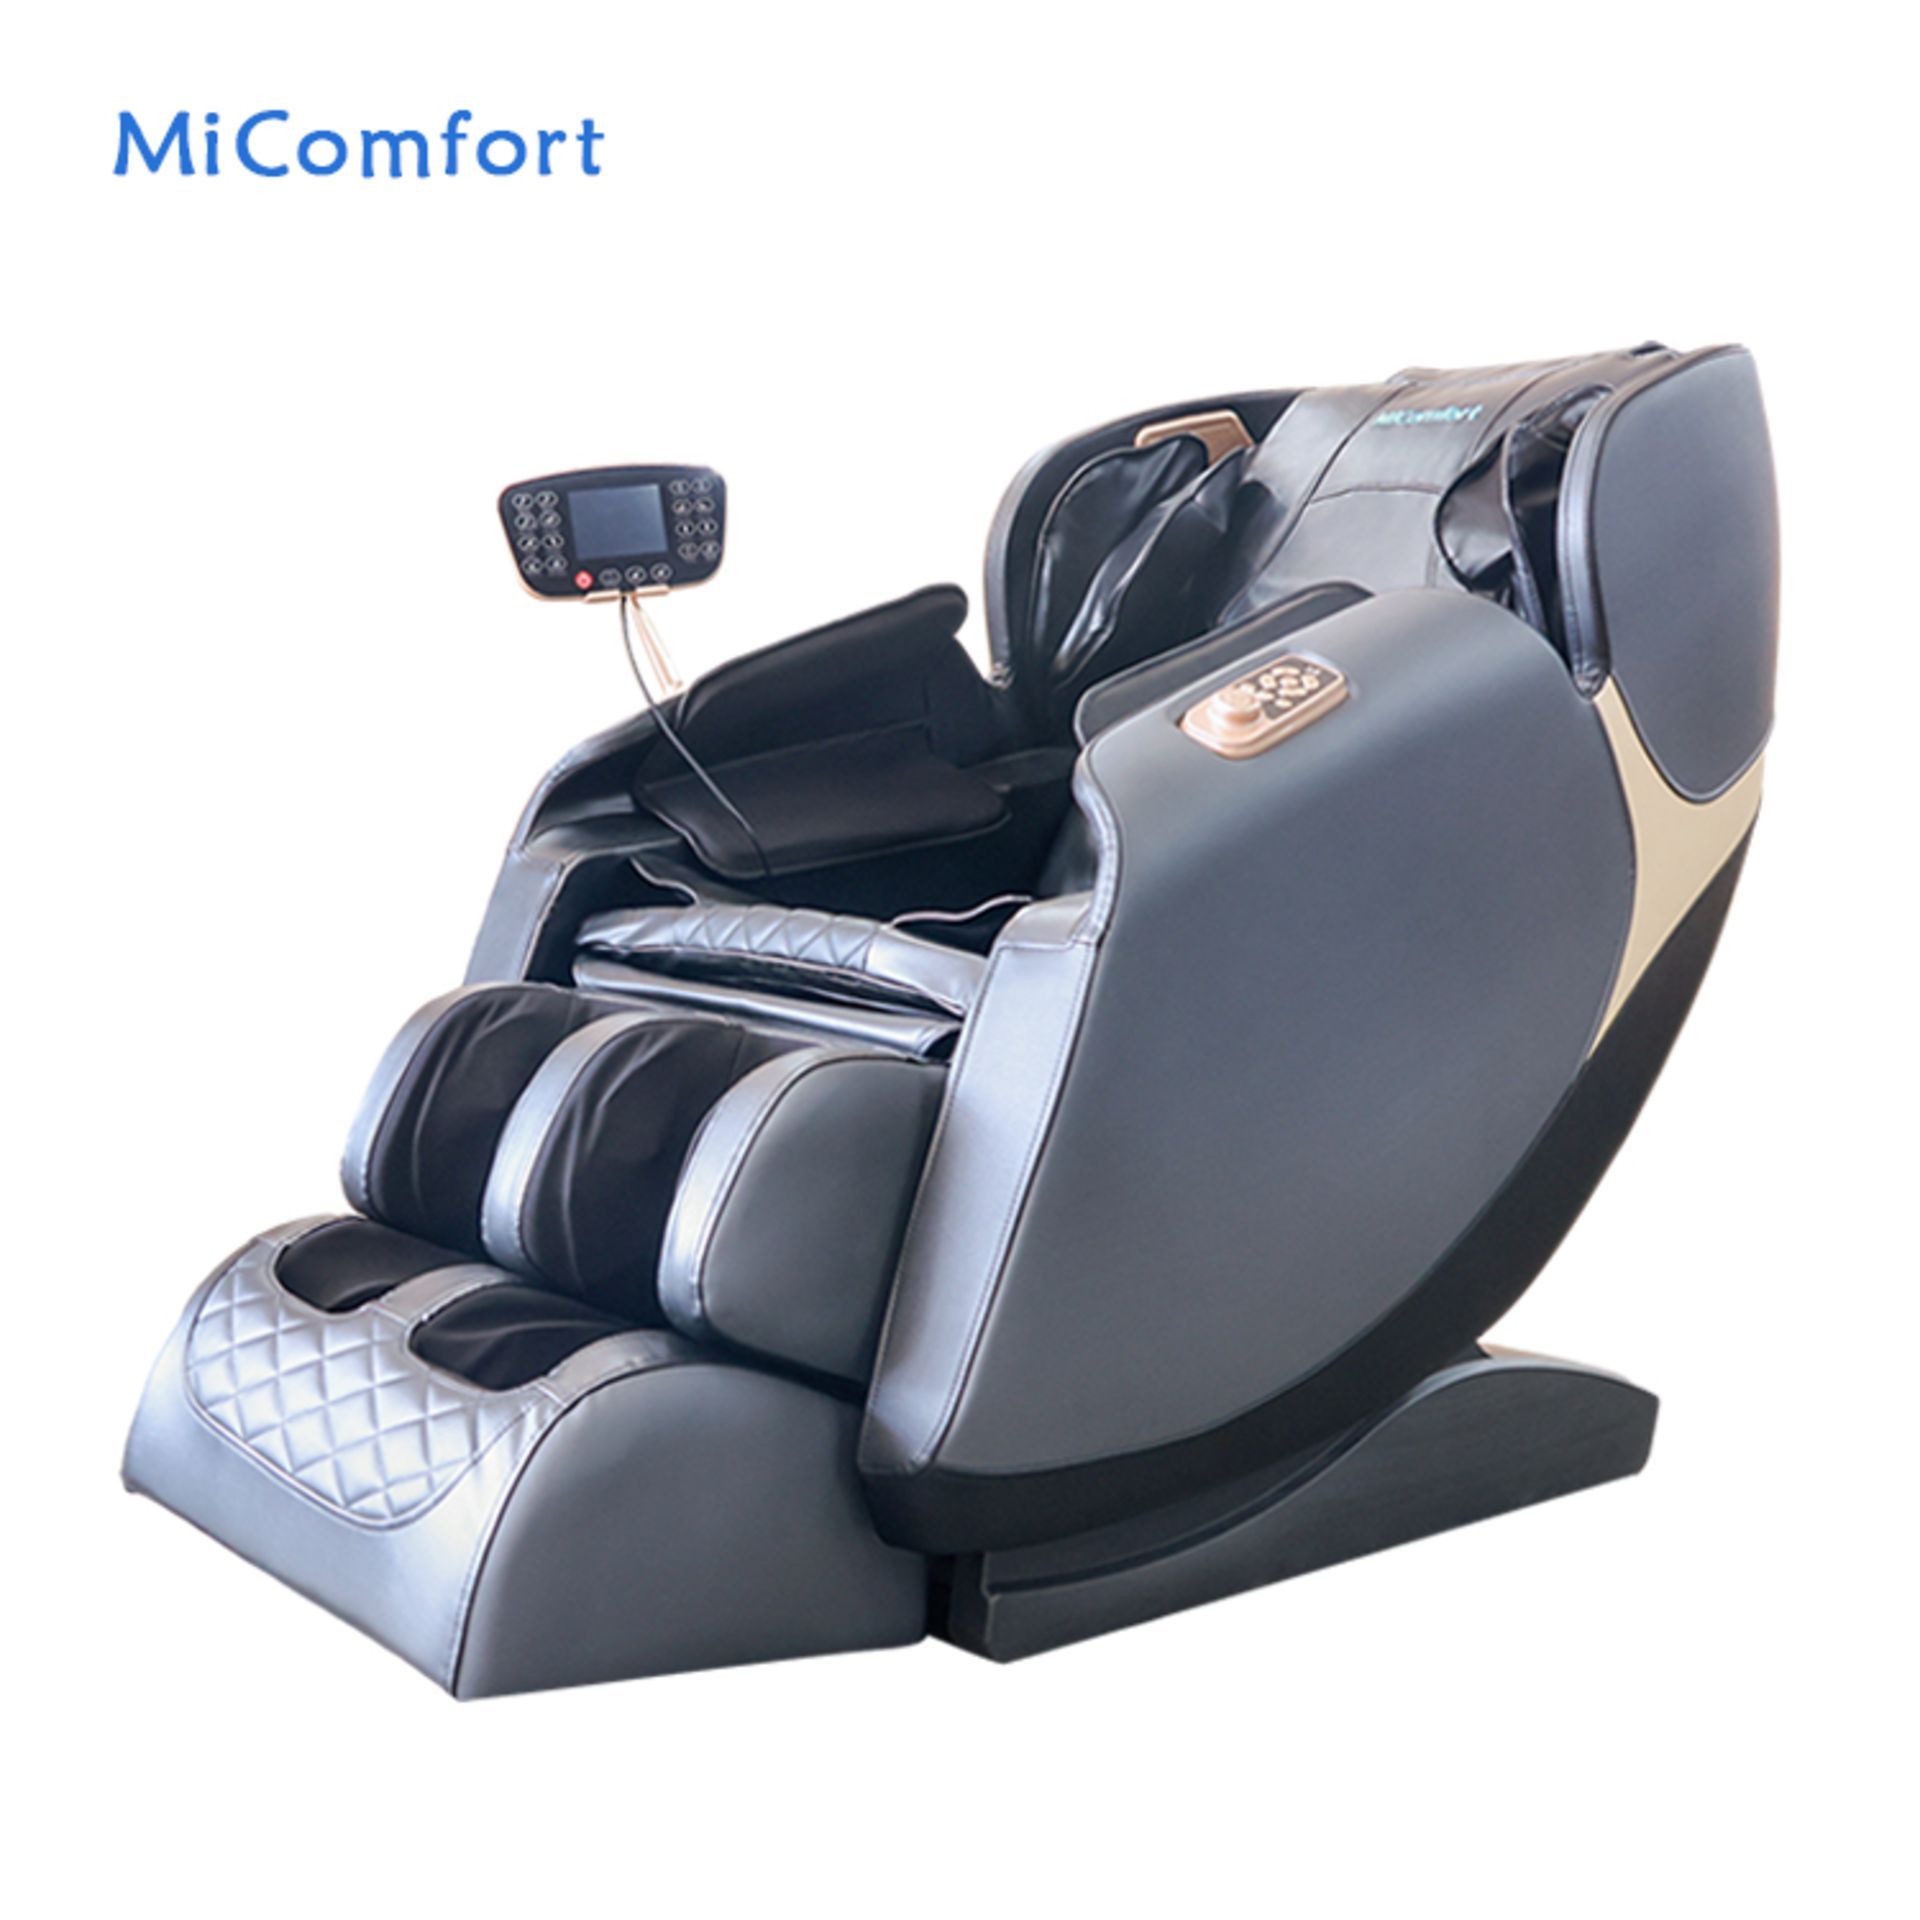 Brand New in Box Orchid Blue/Black MiComfort Full Body Massage Chair RRP £2199 *NO VAT* - Image 14 of 14